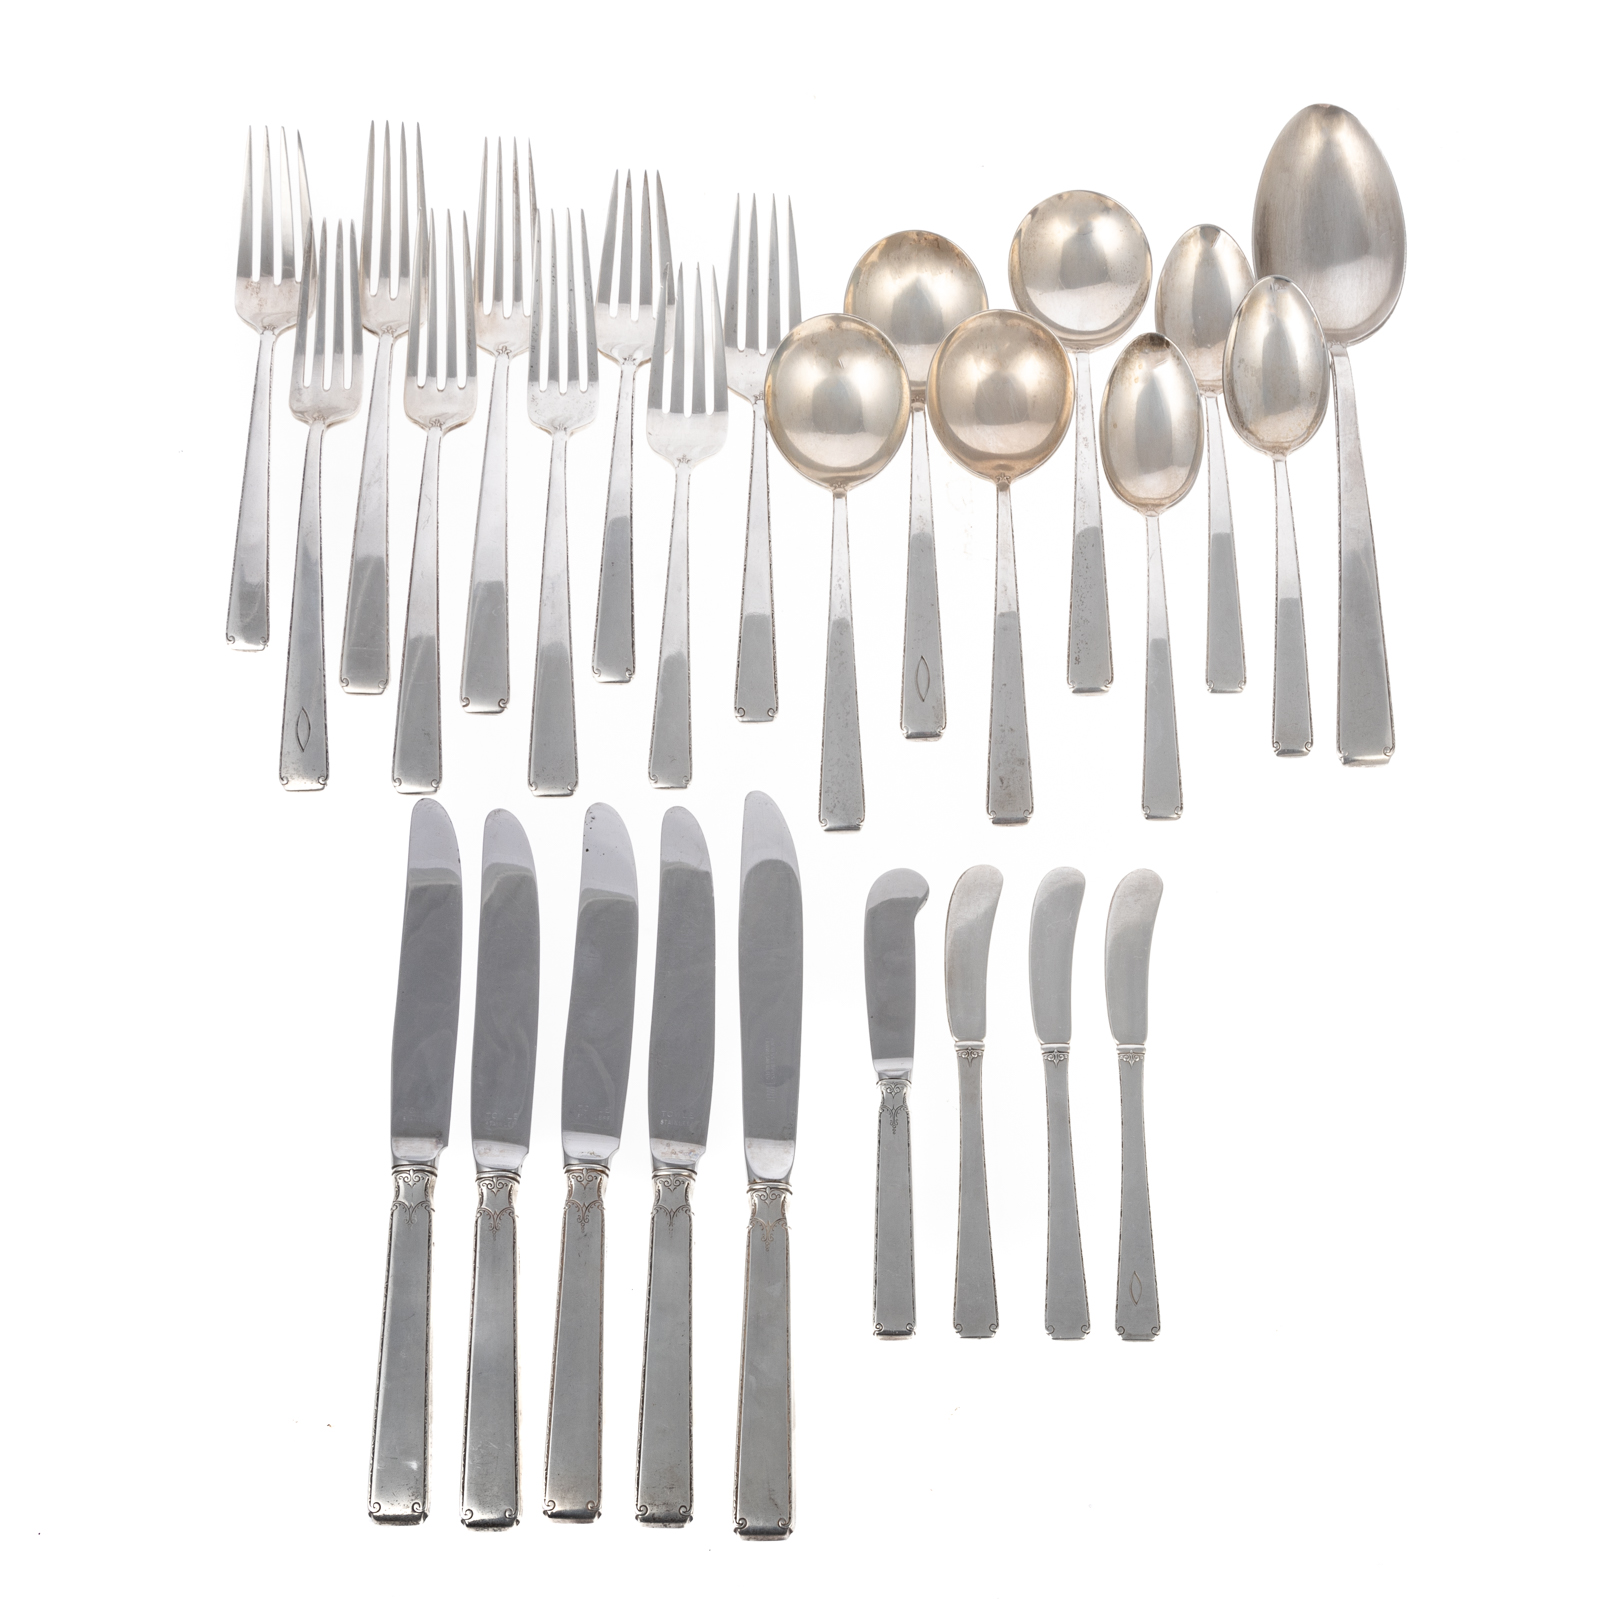 TOWLE STERLING "OLD LACE" FLATWARE